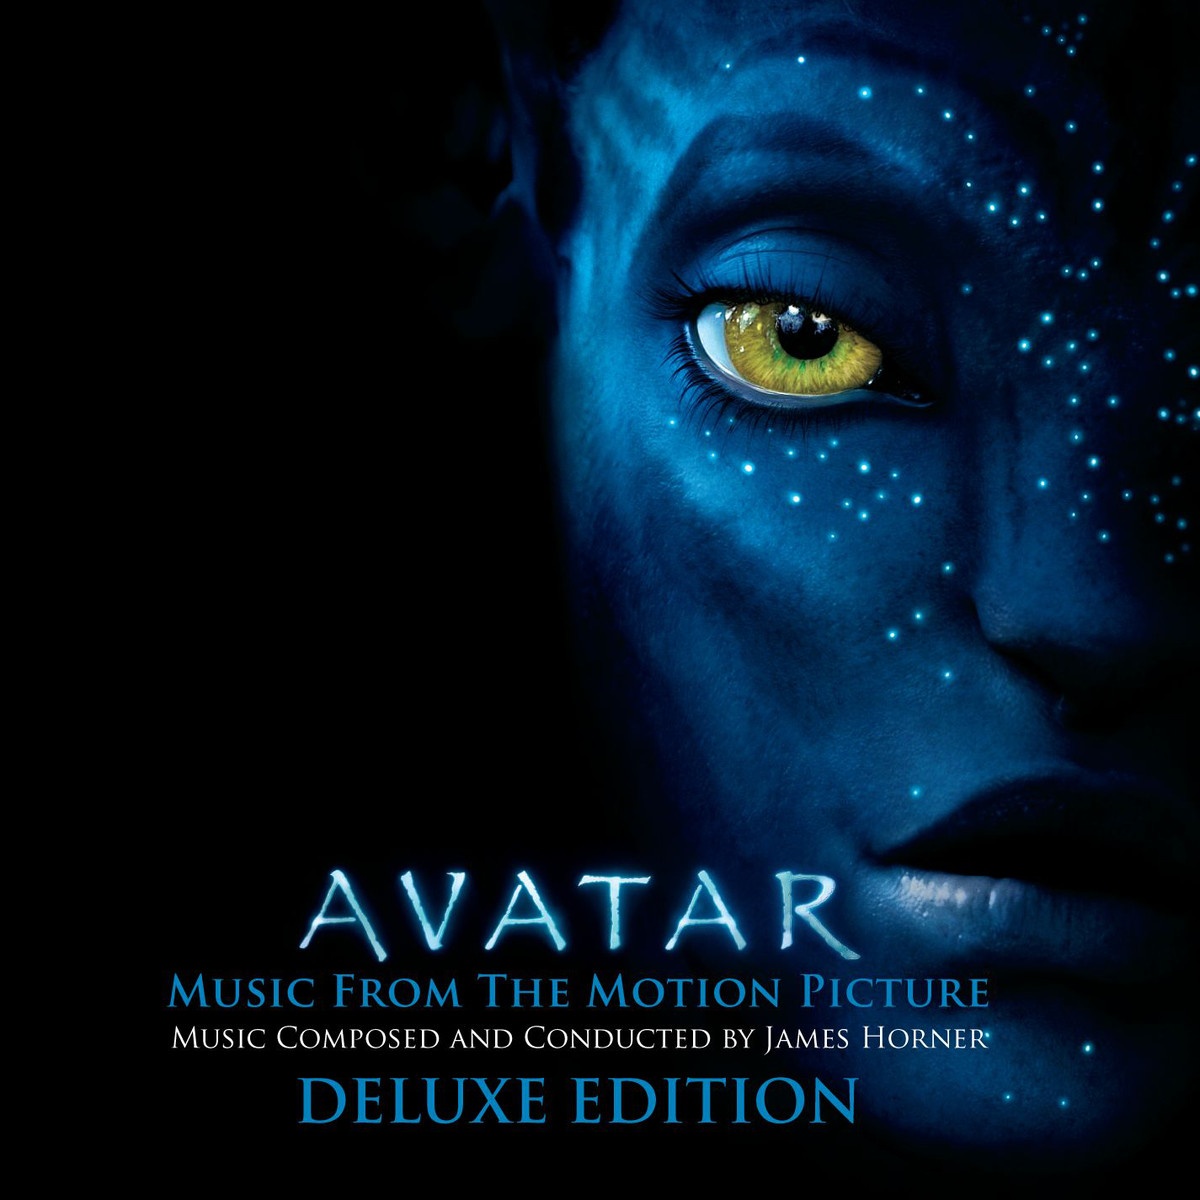 Avatar (Complete Recording Sessions)